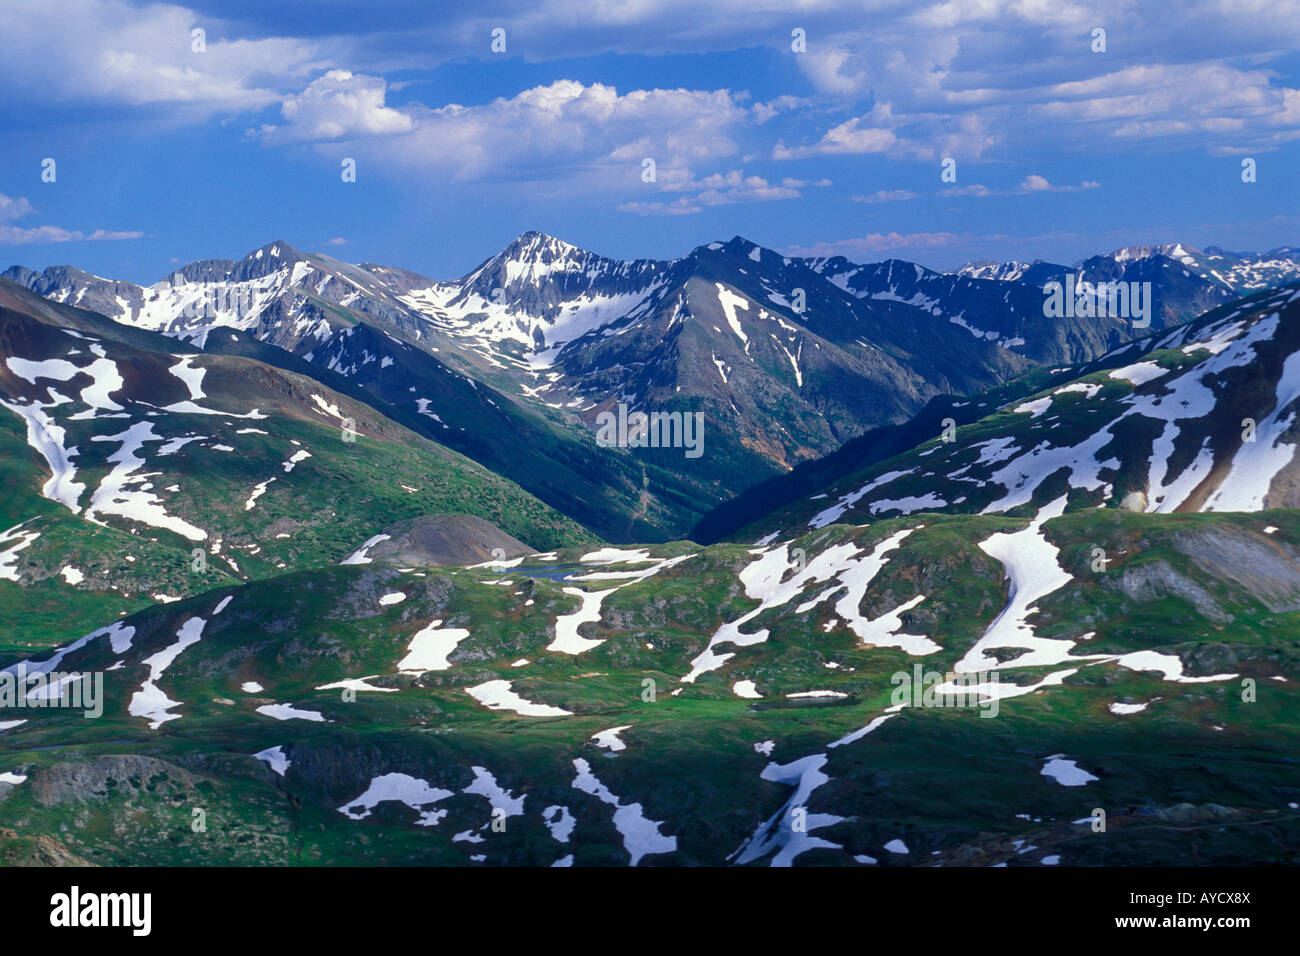 View of the Mount Sneffels from near Engineer Pass, Alpine Loop Scenic Byway, San Juan Mountains, Colorado. Stock Photo